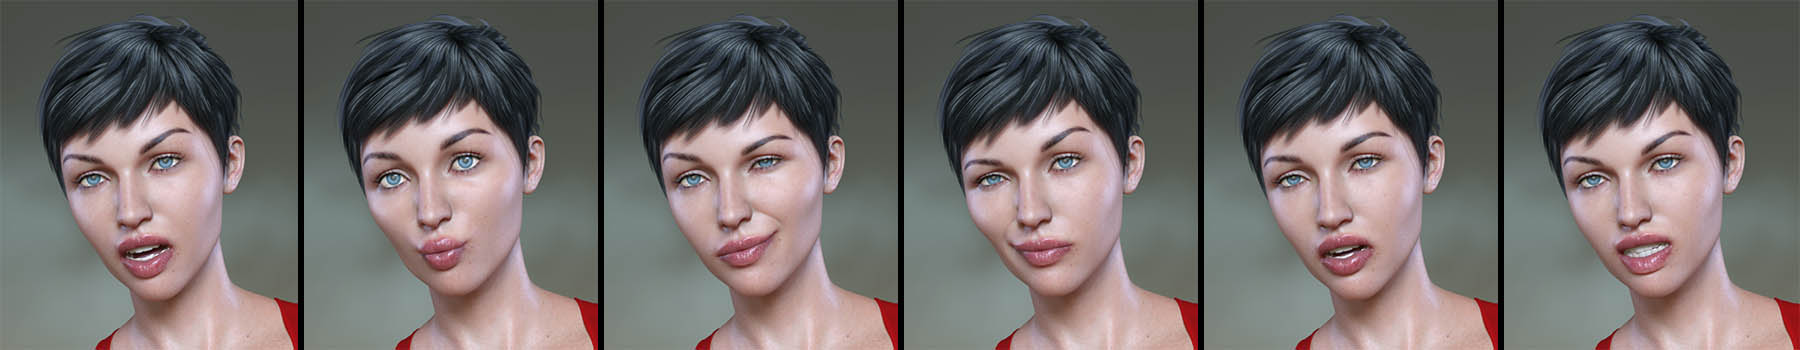 Confident Poses and Expressions for Eva 8 and Genesis 8 Female by: Capsces Digital Ink, 3D Models by Daz 3D